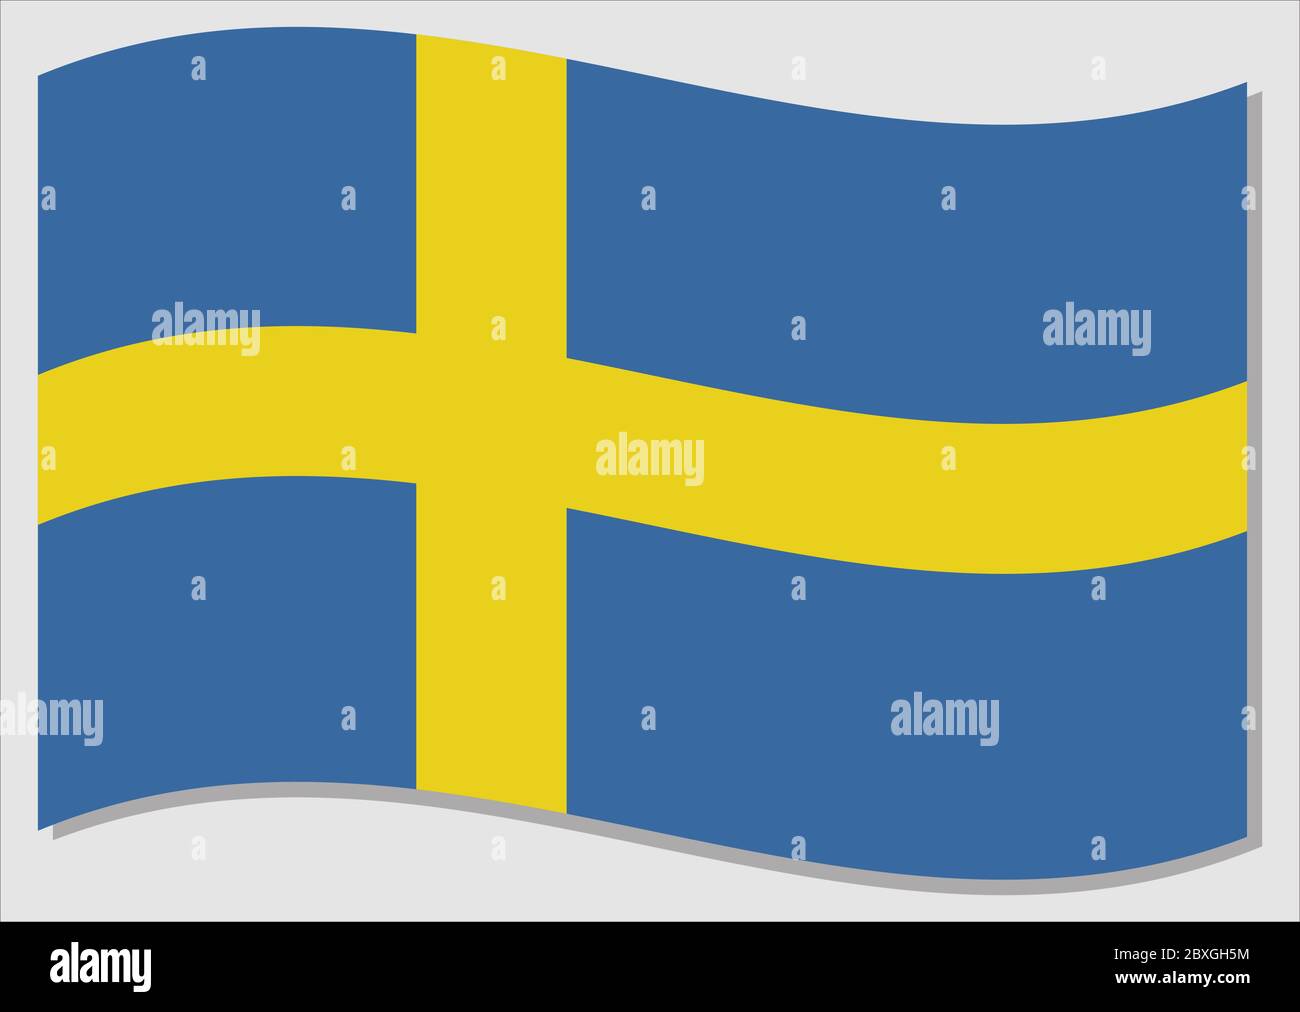 Waving flag of Sweden vector graphic. Waving Swedish flag illustration. Sweden country flag wavin in the wind is a symbol of freedom and independence. Stock Vector